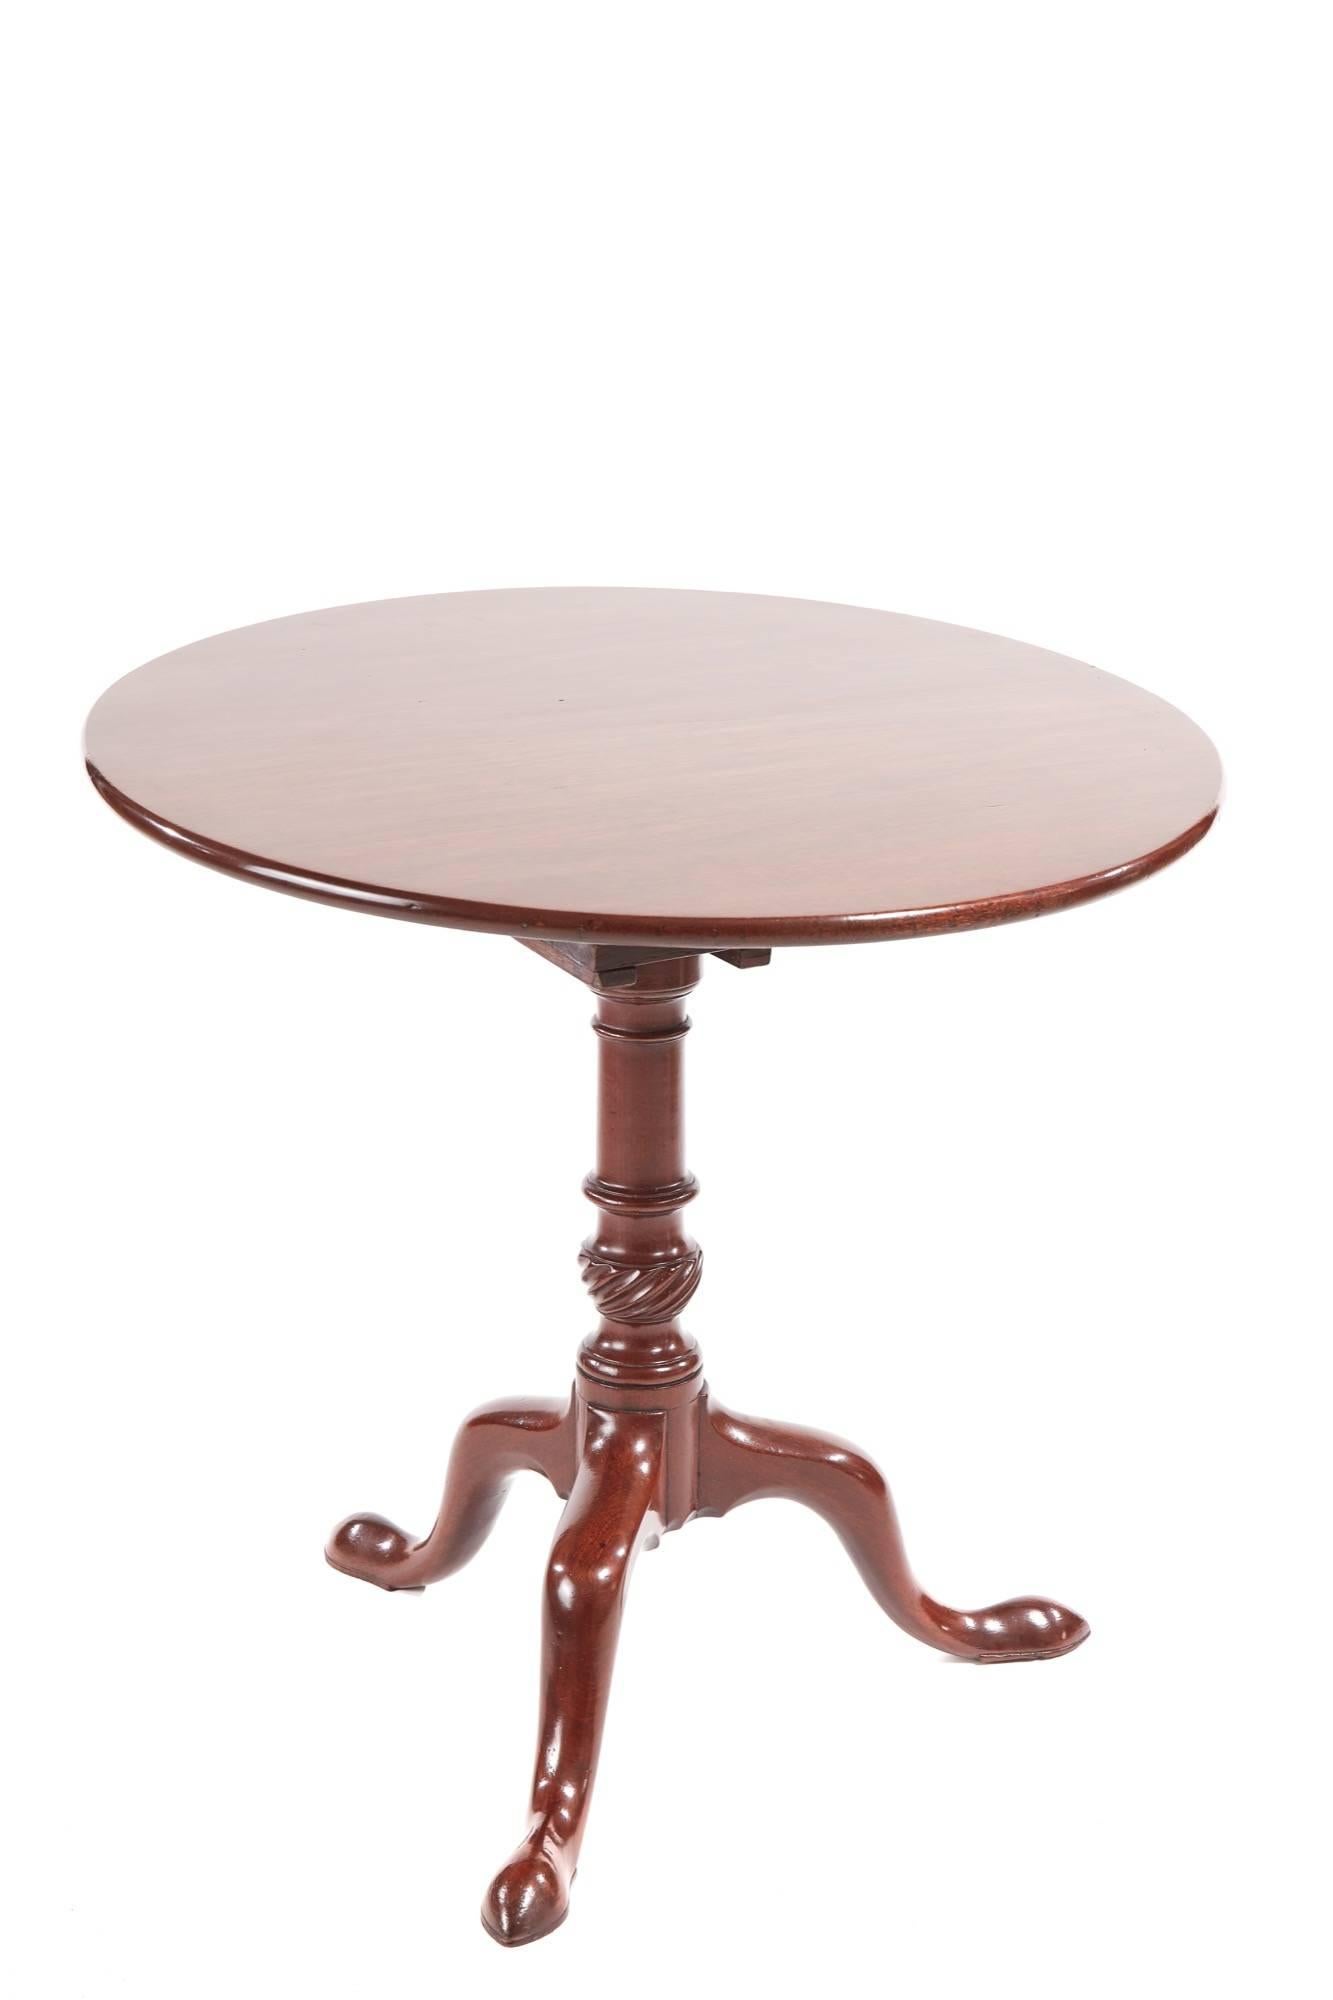 George III mahogany tripod table, with a round solid mahogany top on a revolving birdcage block over a turned and reeded pedestal, raised on three shaped cabriole legs with pad feet
Lovely colour and condition.